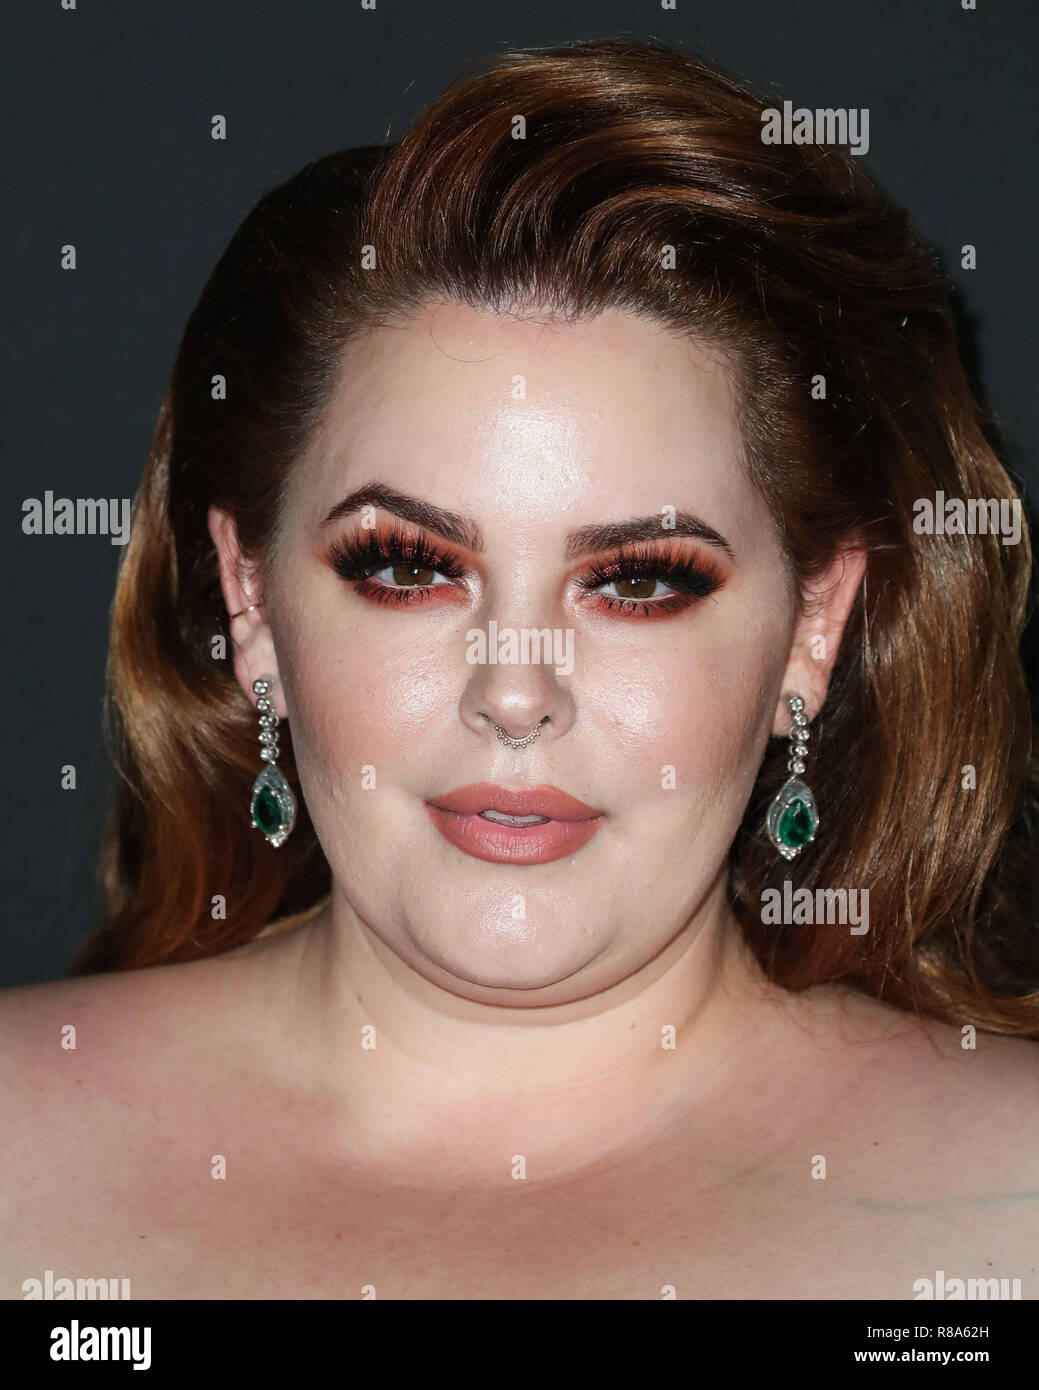 LOS ANGELES, CA, USA - OCTOBER 22: Model Tess Holliday wearing an Eloquii dress, River Island shoes, Kukka Jewelry and carrying a Onna Ehrlich clutch arrives at the InStyle Awards 2018 held at the Getty Center on October 22, 2018 in Los Angeles, California, United States. (Photo by Xavier Collin/Image Press Agency) Stock Photo